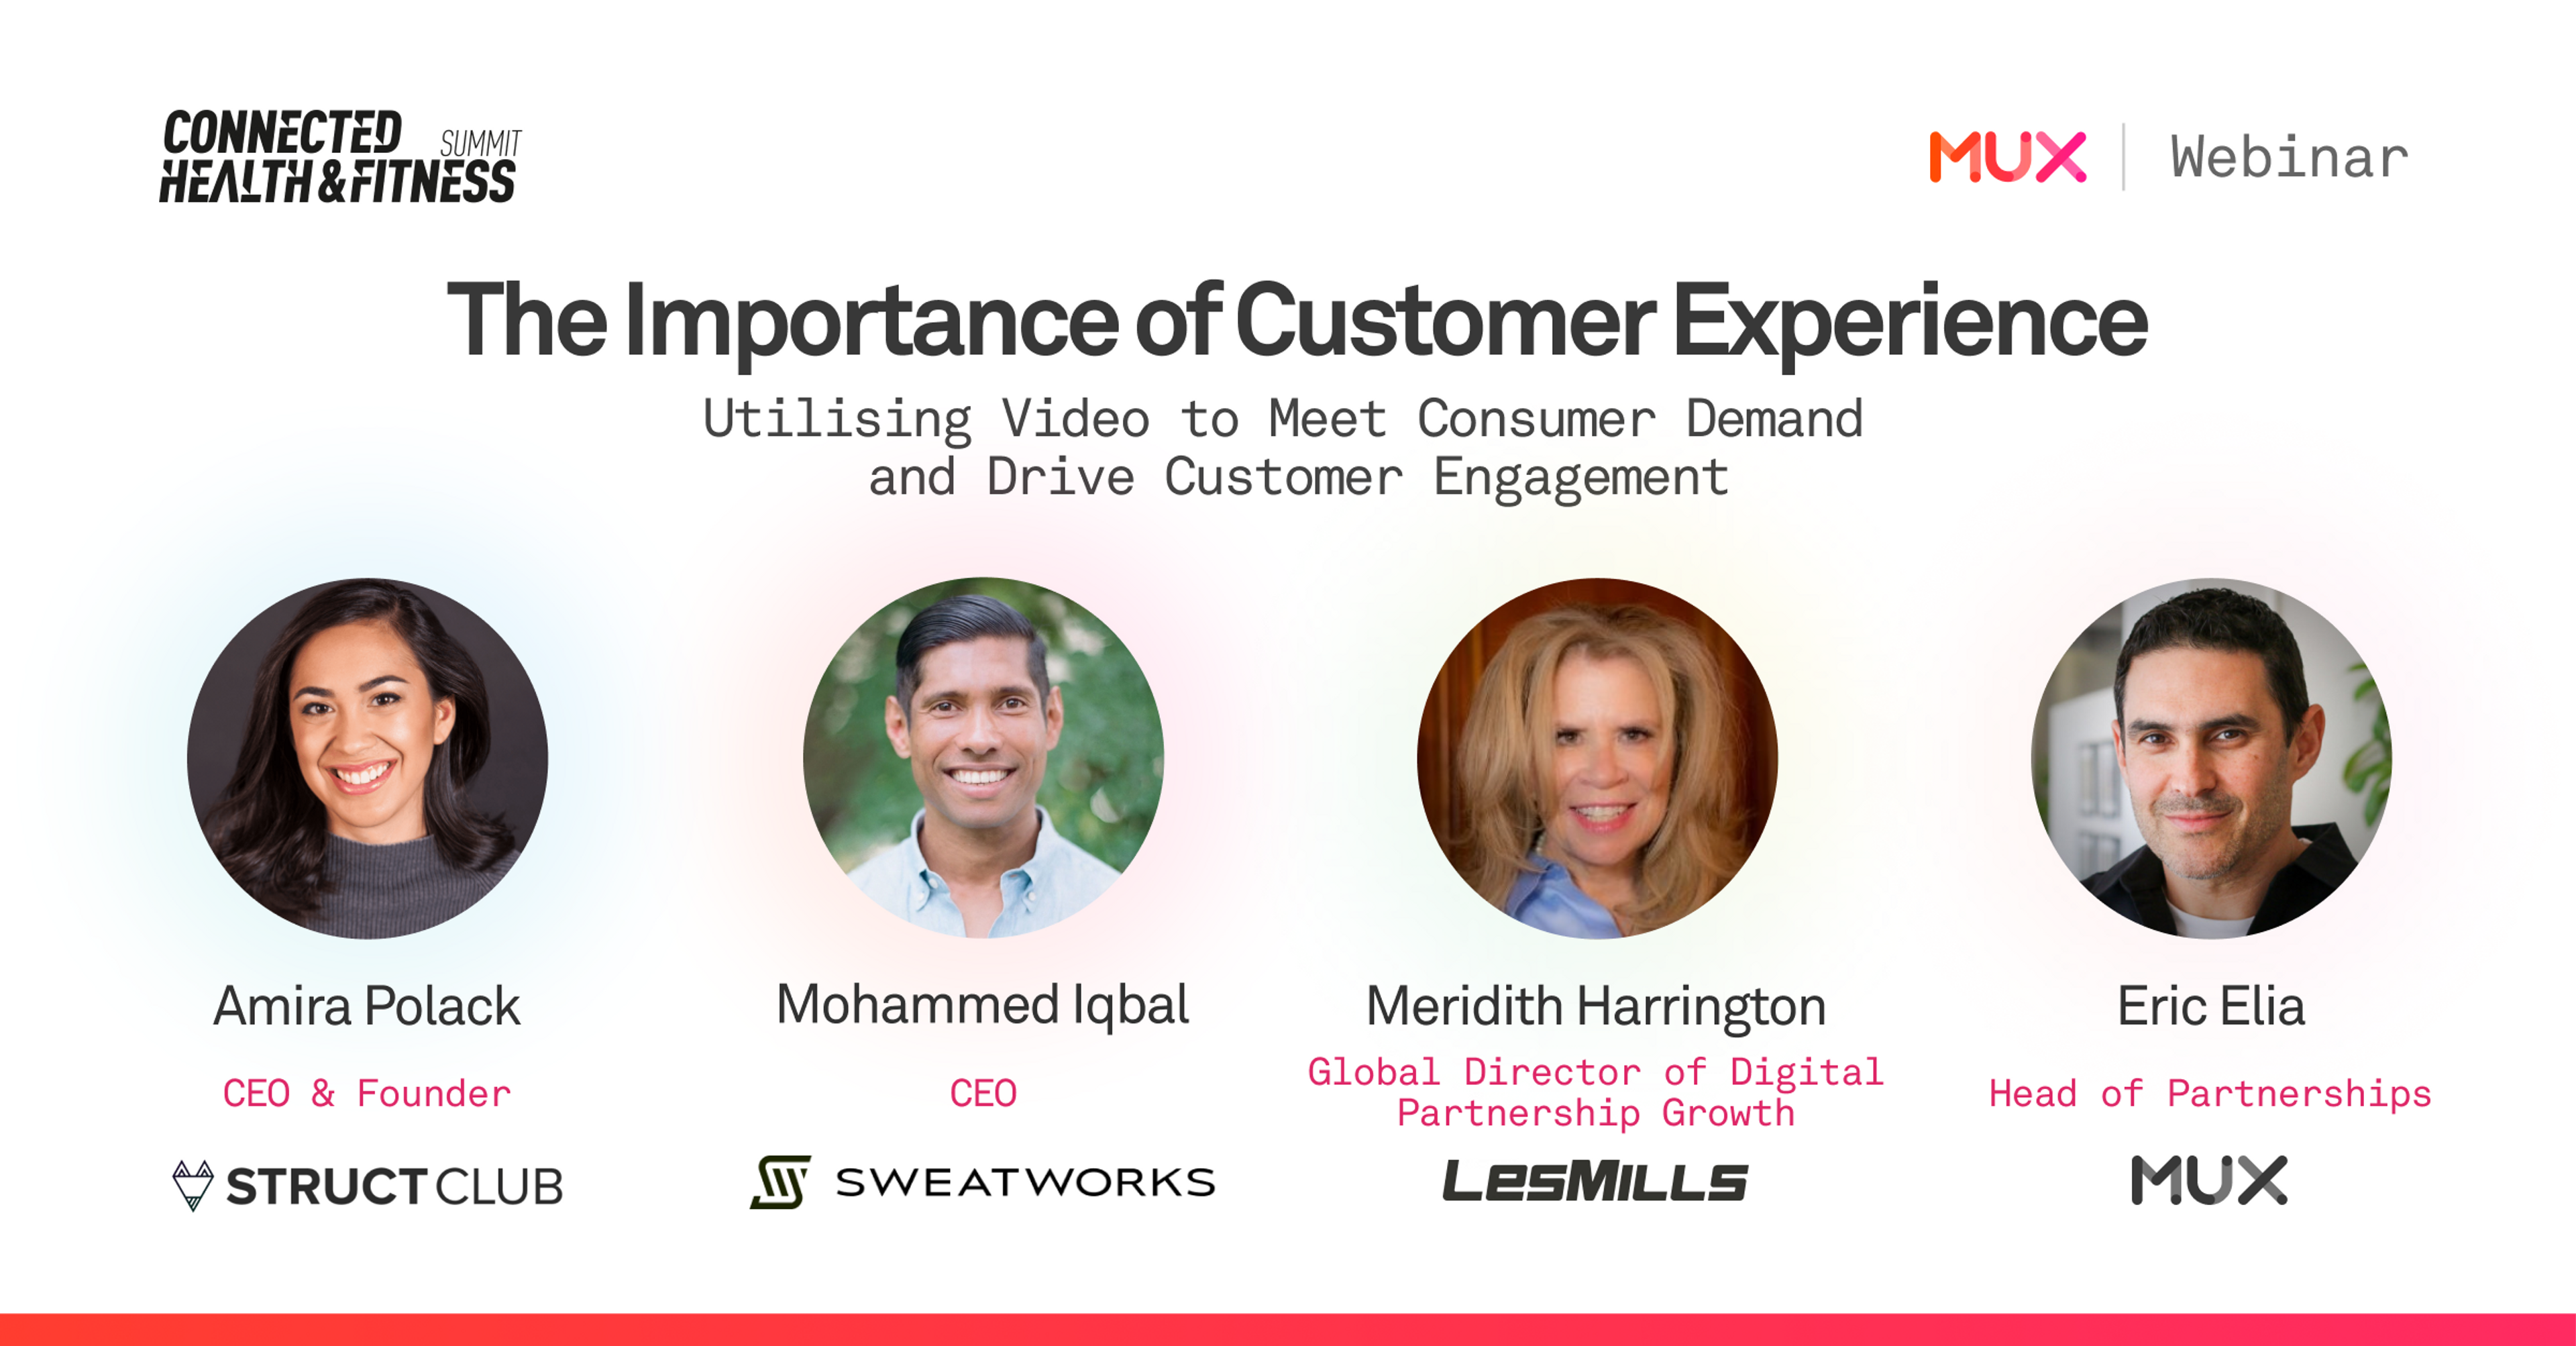 On a white background, title of the webinar with images of the following:  Mohammed (Mo) Iqbal, CEO of SweatWorks; Amira Polack, CEO and Founder of Struct Club; Meredith Harrington, Global Director of Digital Partnership Growth for Les Mills; and Eric Elia Head of Partnerships at Mux. Company logos below each image.